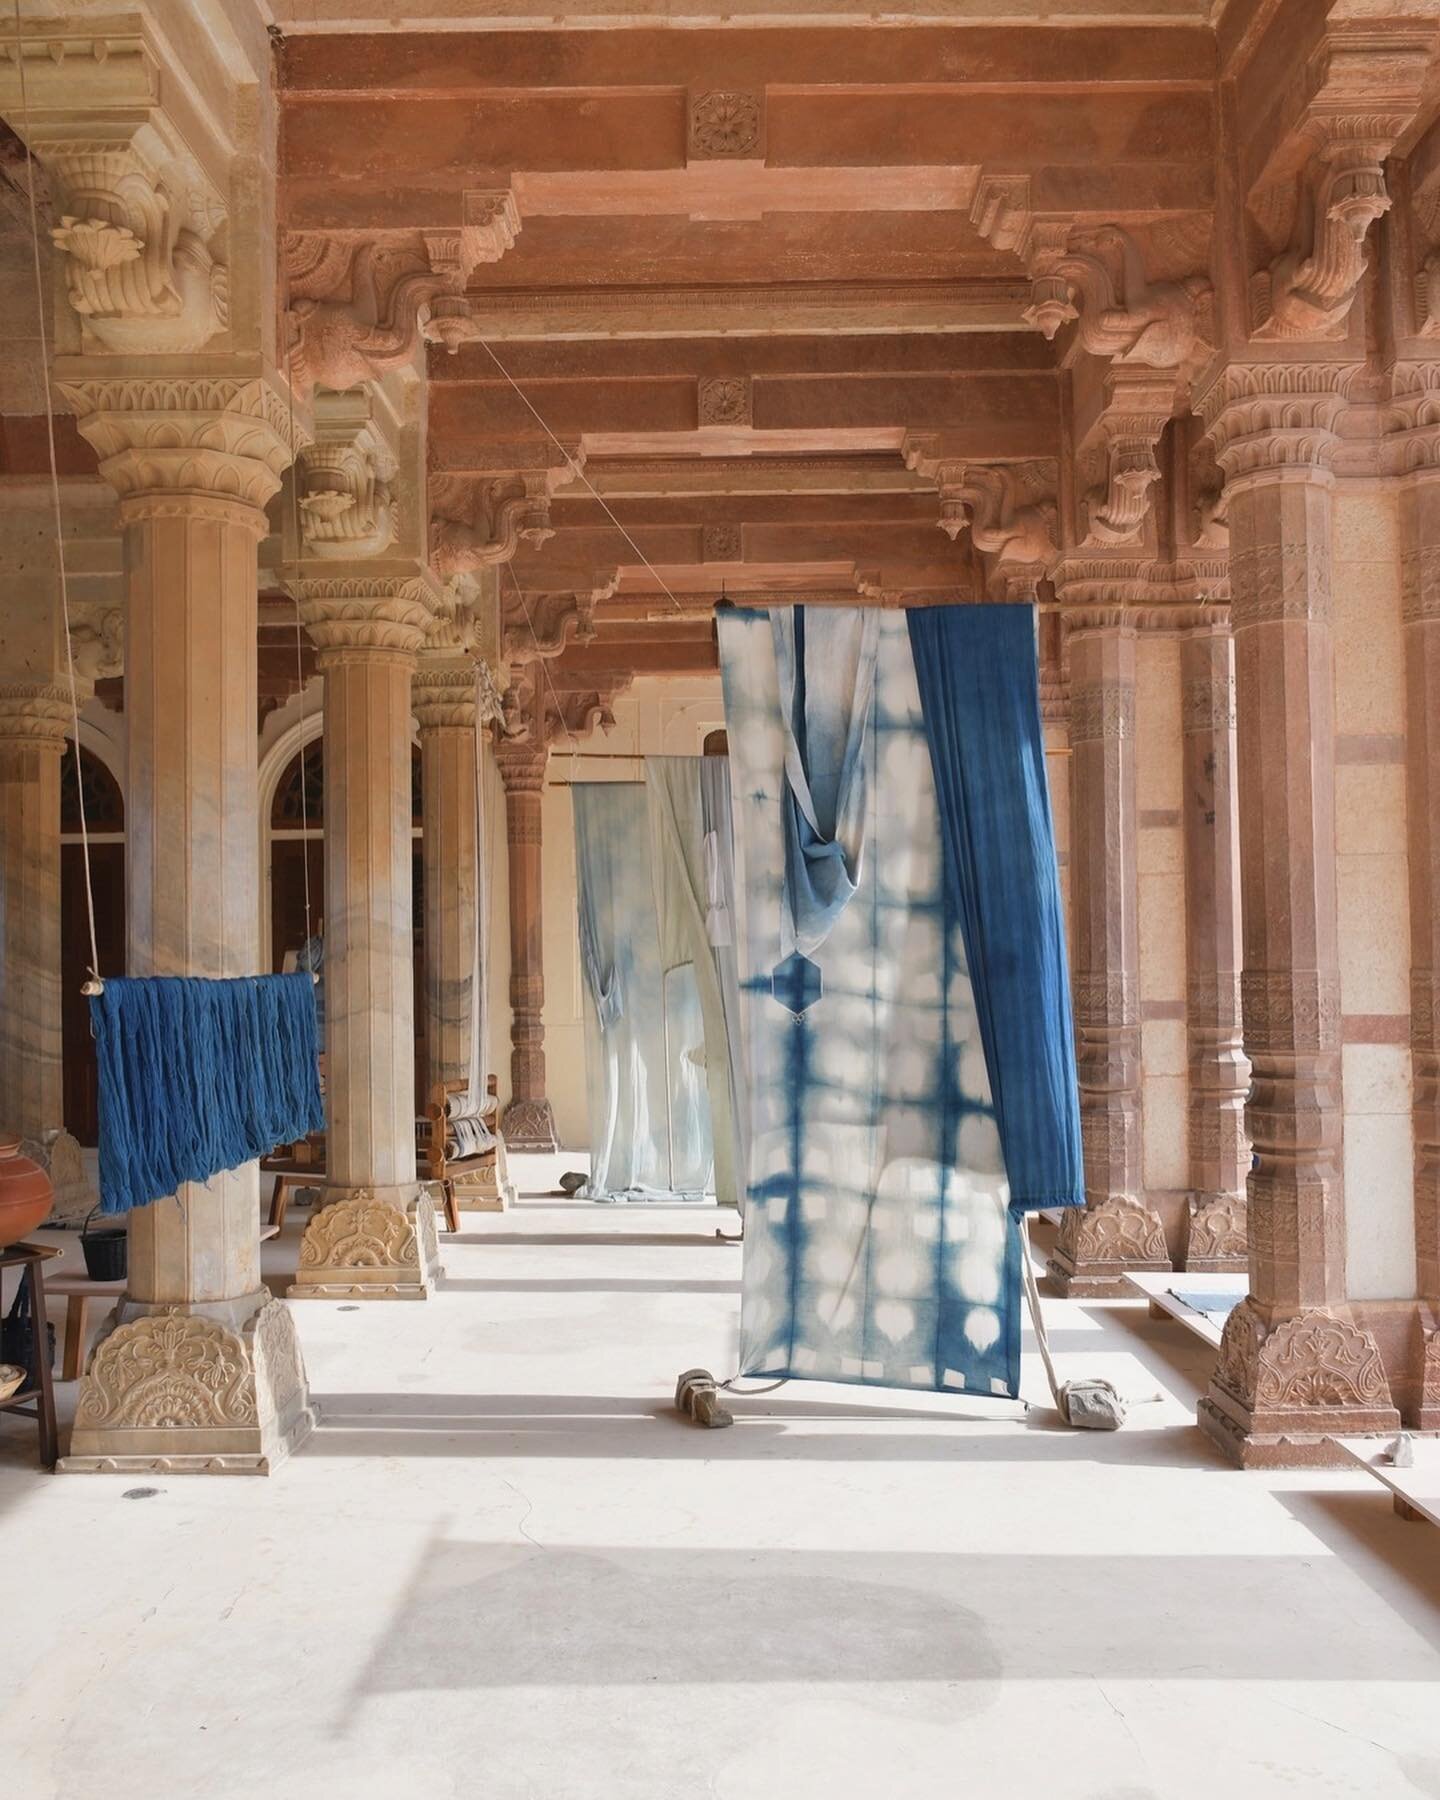 💙 @marthamarialebars&rsquo; textile installation &lsquo;sa re ga ma ii&rsquo; at Jaipur&rsquo;s Amber Fort last month. Swipe to see more of her work with natural indigo, created while in residence at @nilajaipur.

Martha-Maria combines textiles with